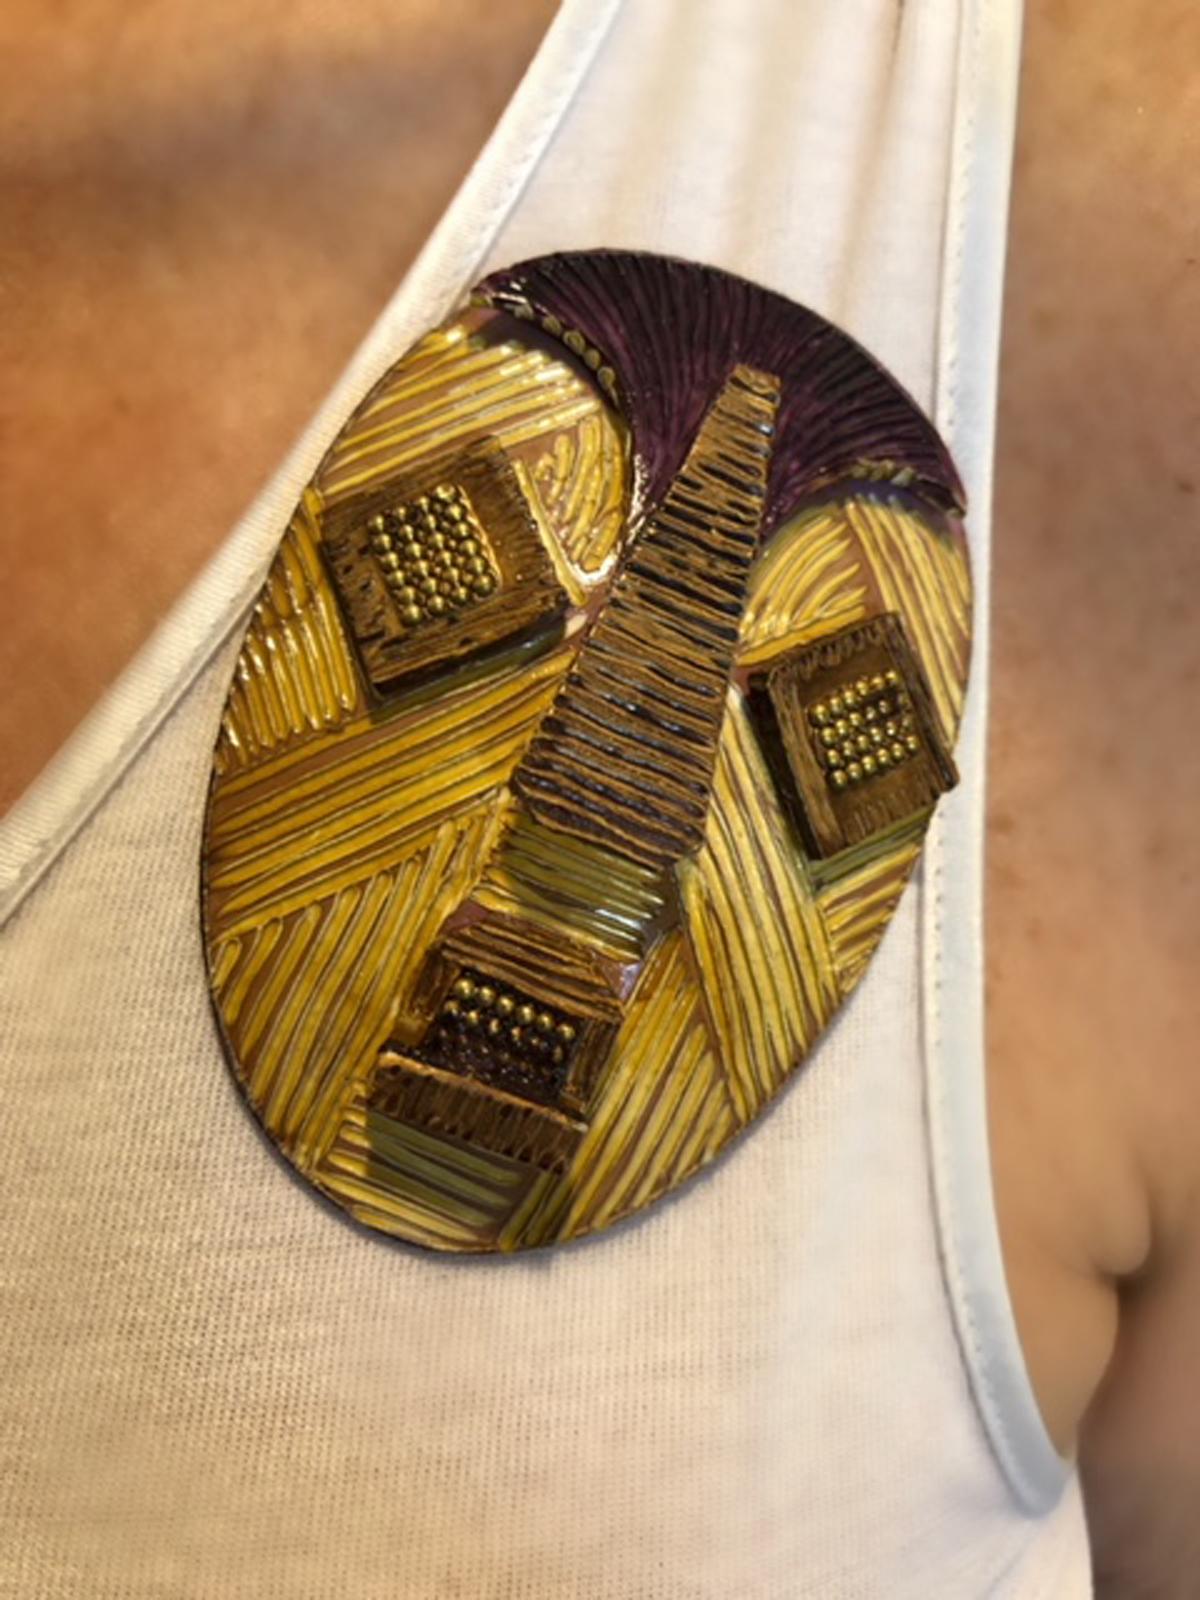 Light and easy to wear, this handmade artisanal pin was made in Paris by Cilea. The lightweight pin features a tribal African/Tiki mask, comprised out of enamel and resin composite. The pins three-dimensional oversized body features bright colors, a